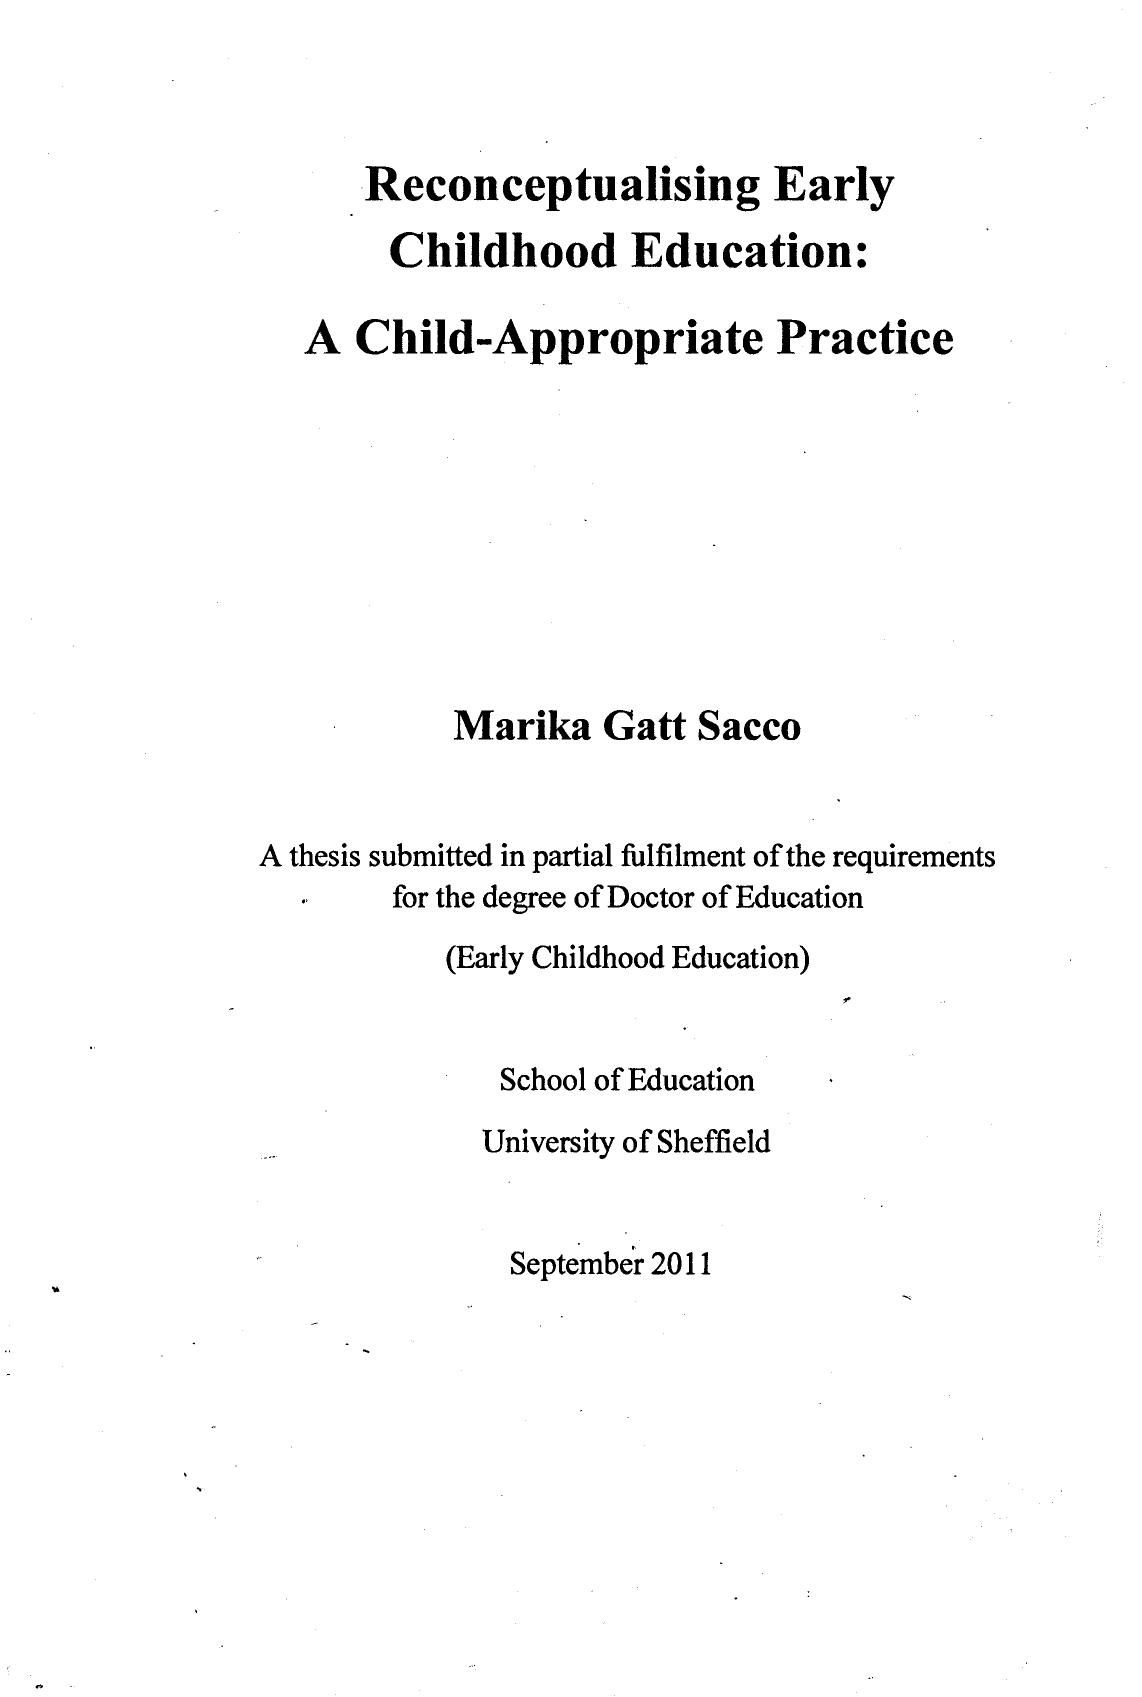 Reconceptualising Early Childhood Education 2011.pdf